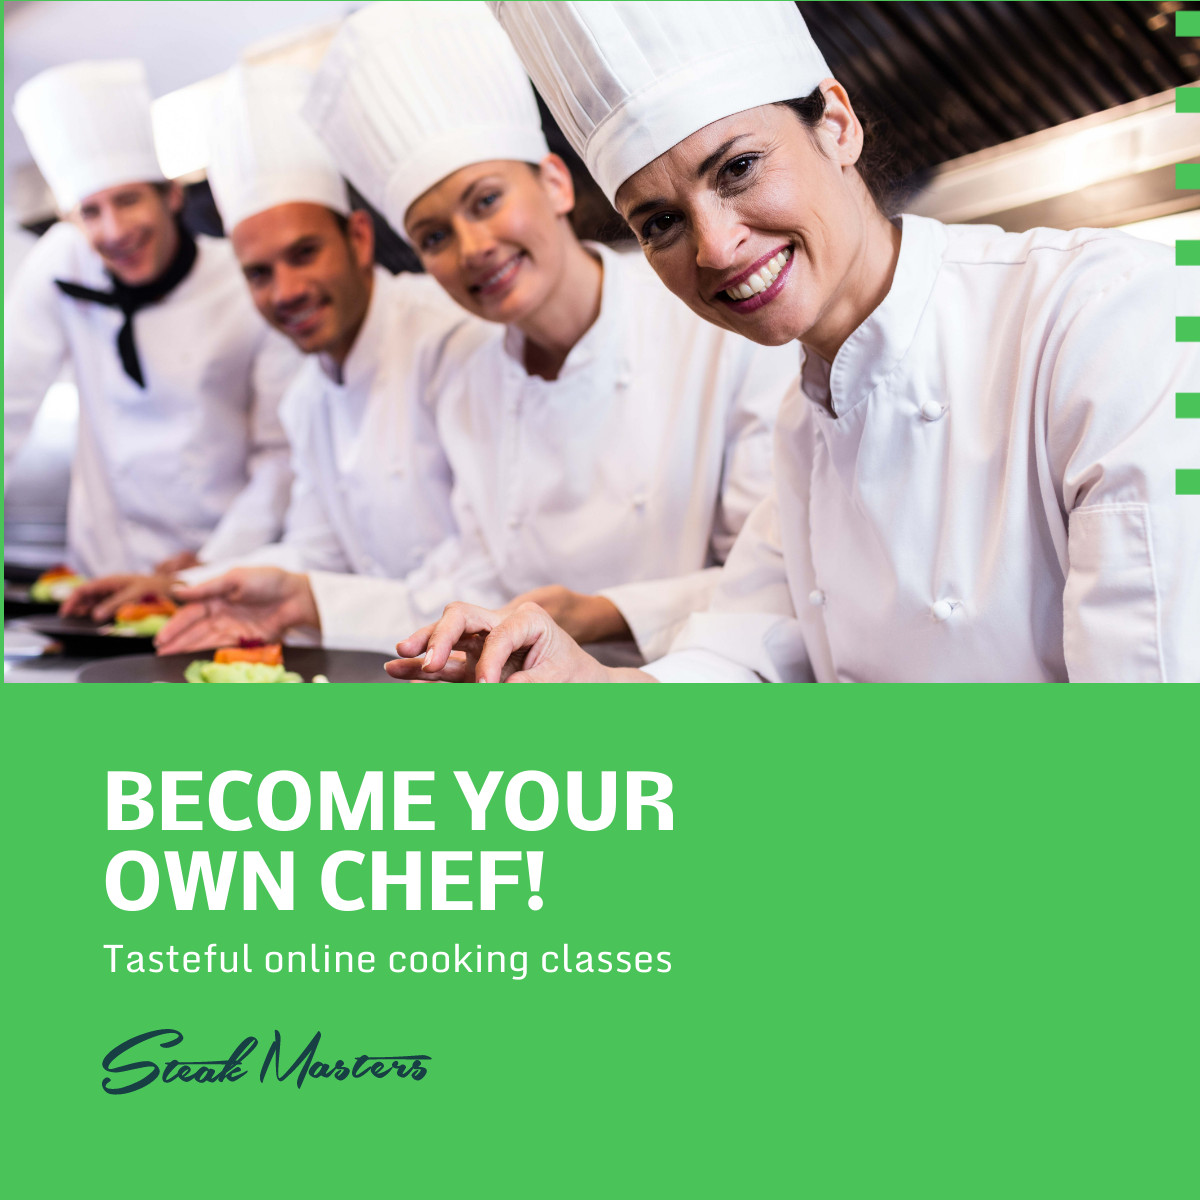 Become Your Own Chef